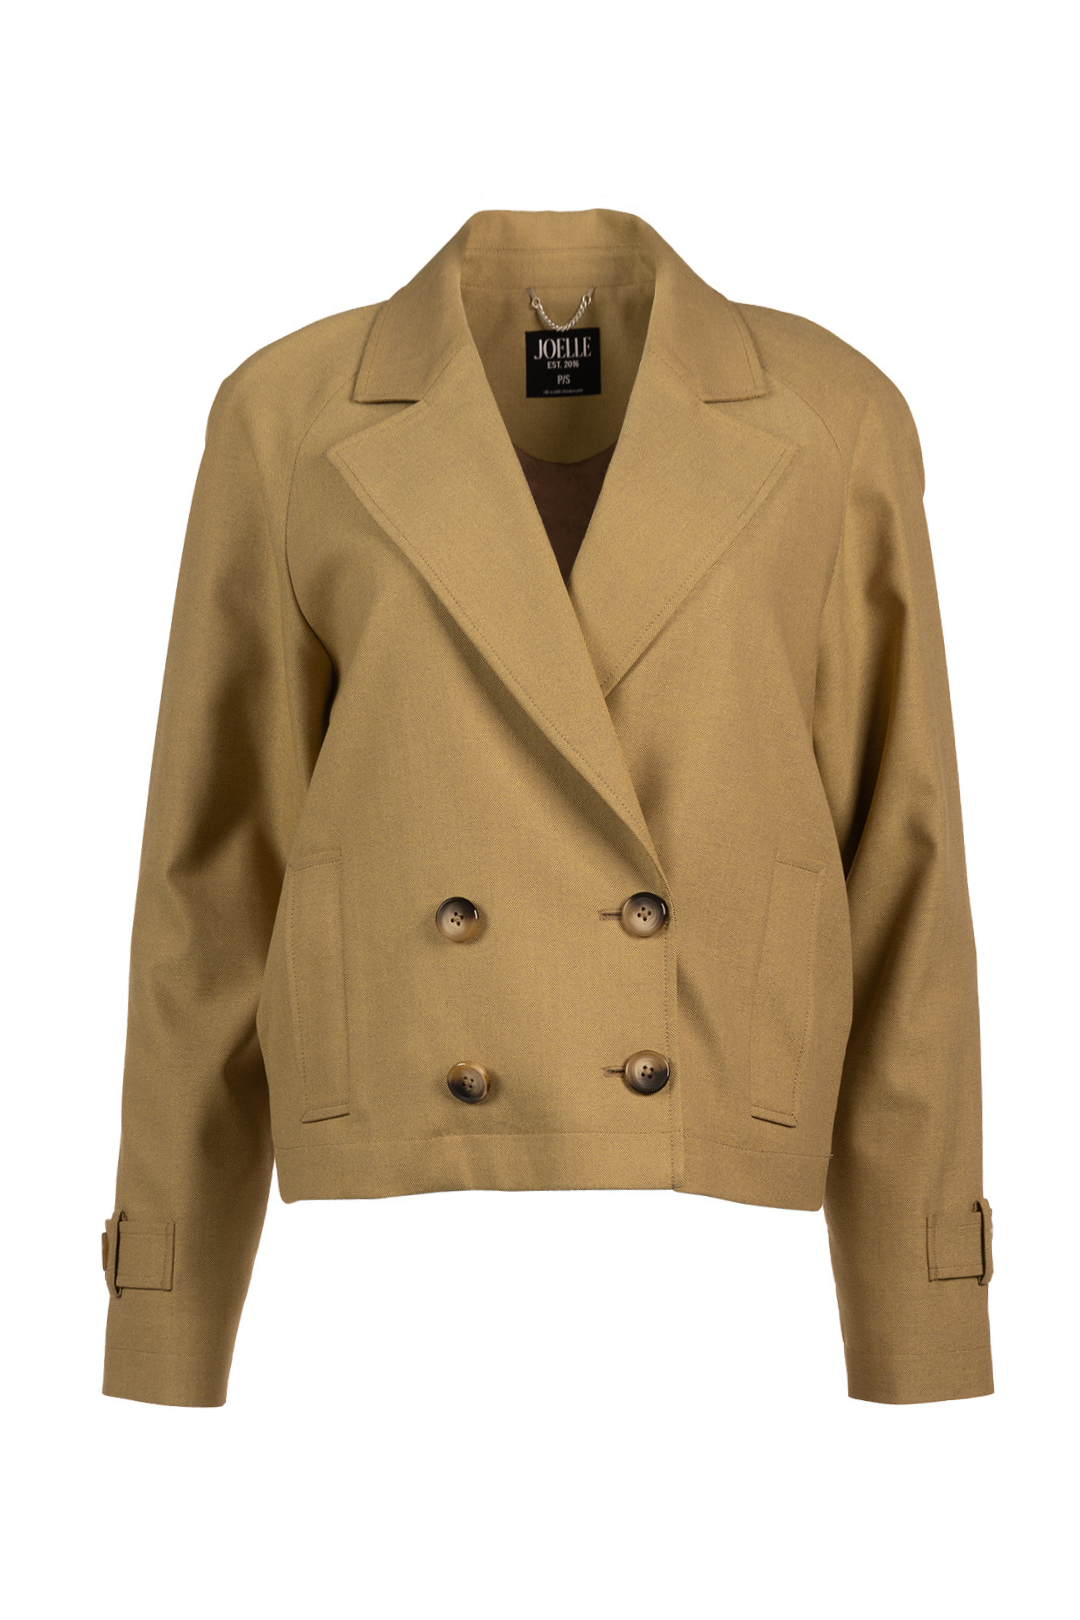 Mid-length ocher yellow jacket with fitted waist | State